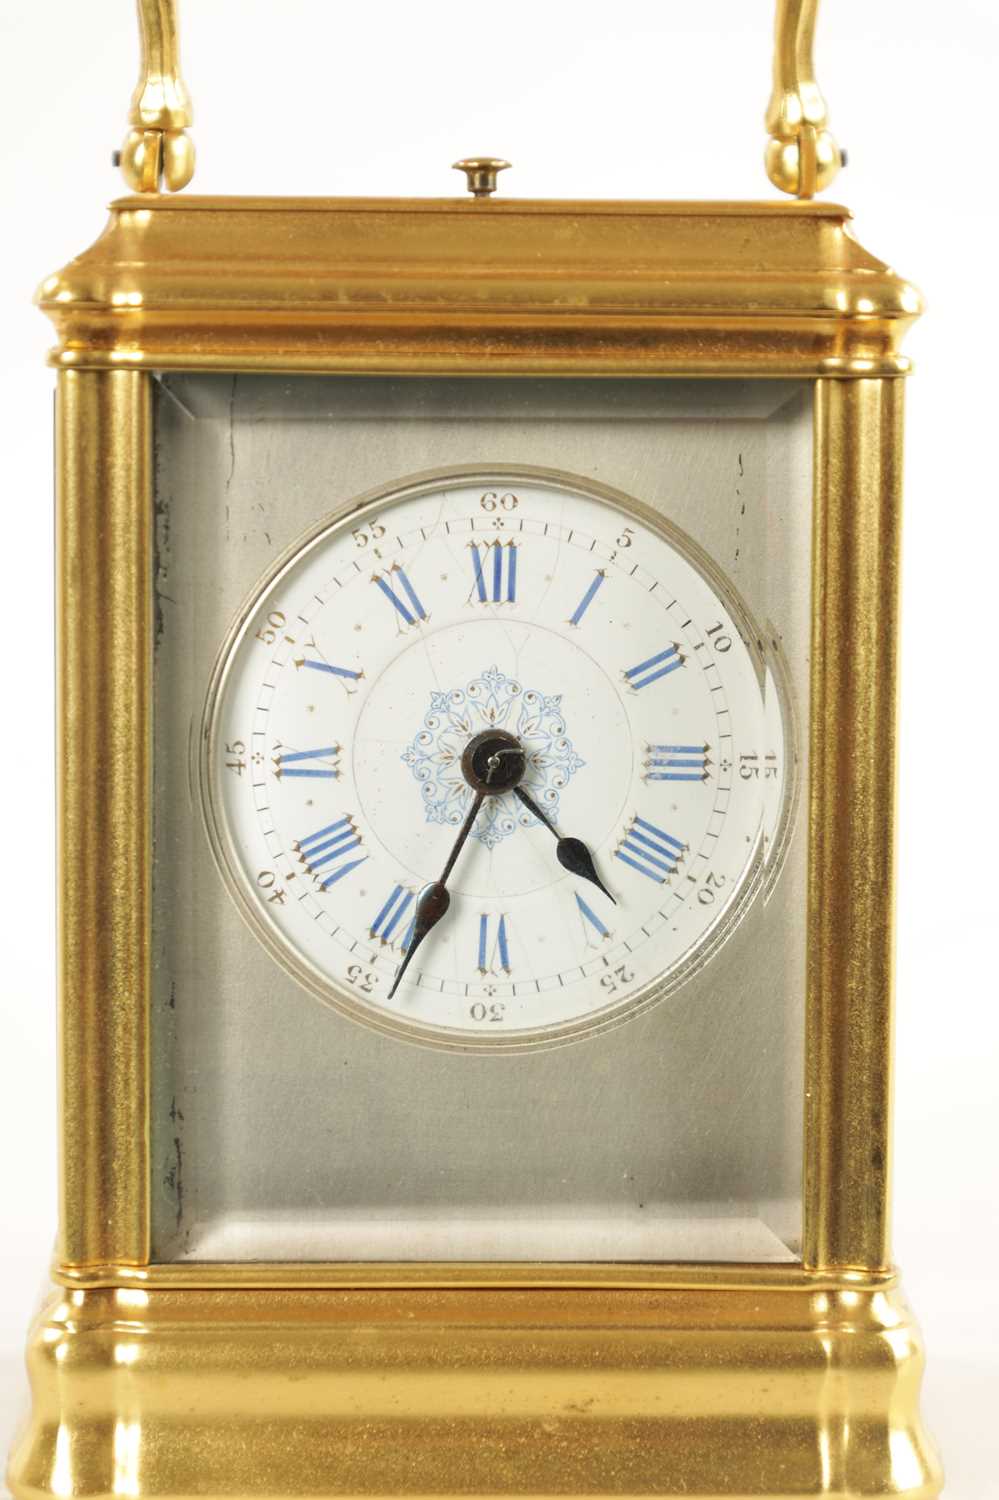 A LATE 19TH CENTURY FRENCH GORGE-CASED QUARTER CHIMING/REPEATING CARRIAGE CLOCK - Image 3 of 9